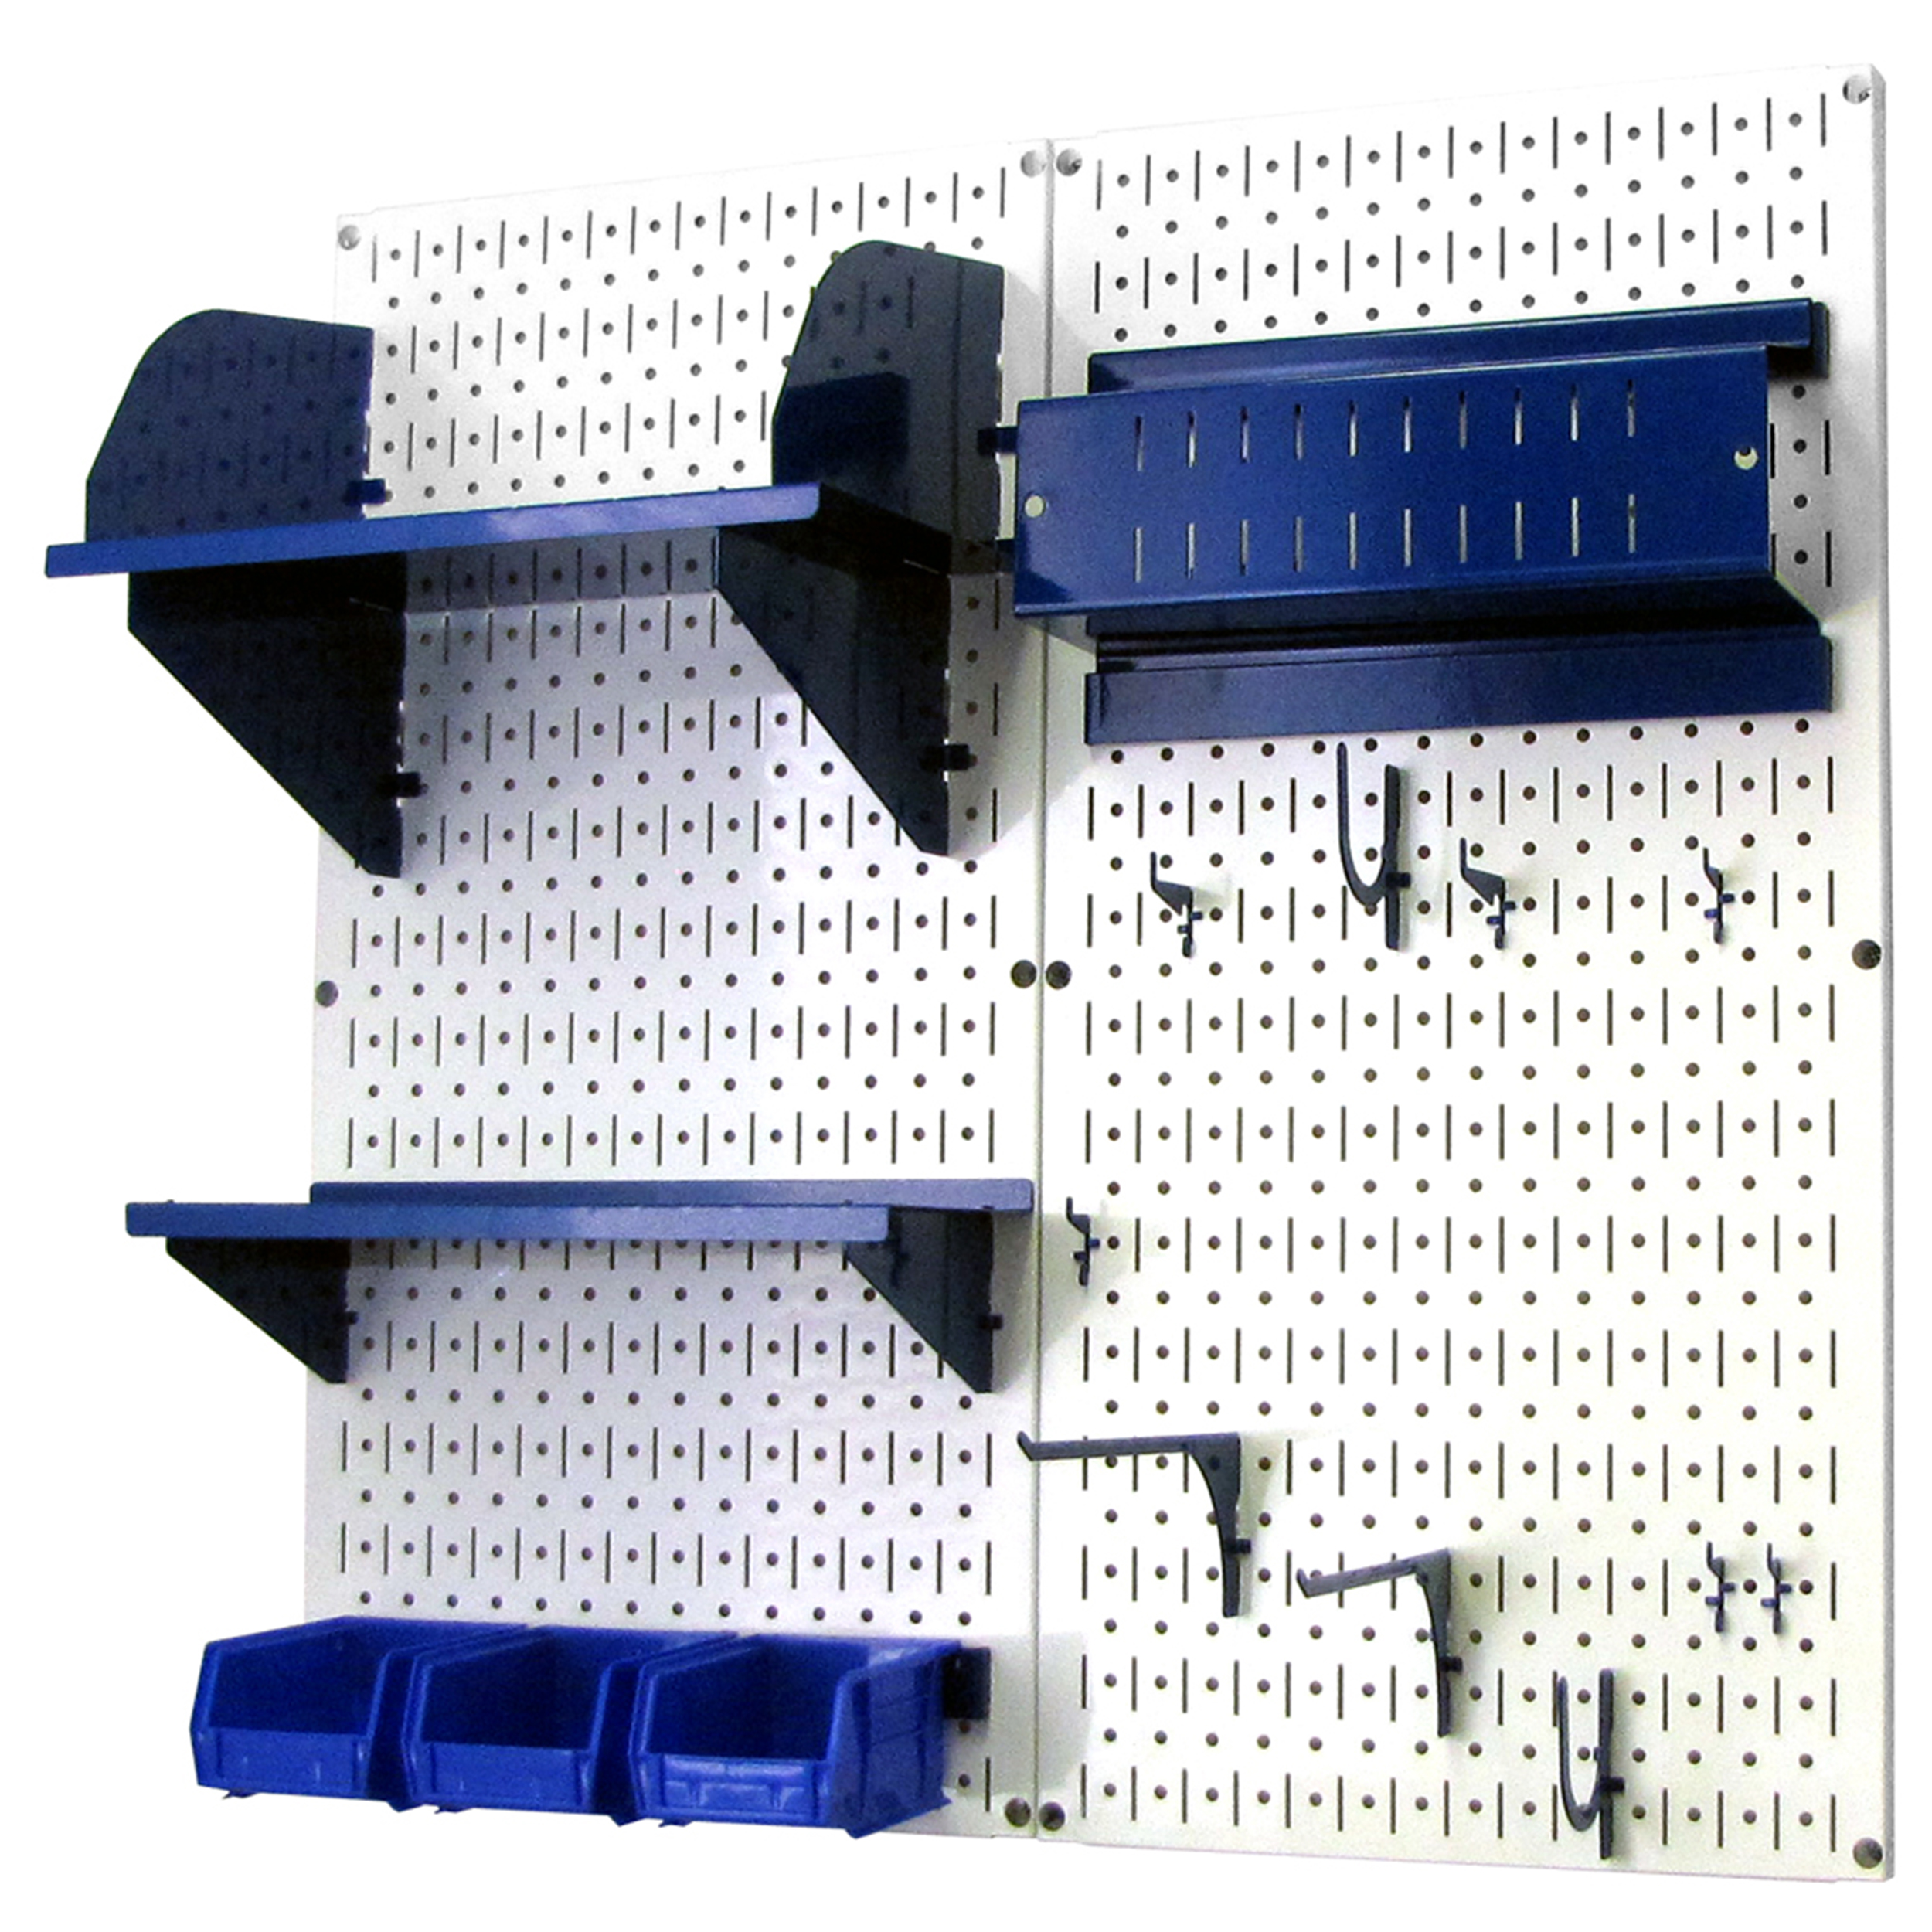 Pegboard Hobby Craft Pegboard Organizer Storage Kit With White Pegboard And Blue Accessories